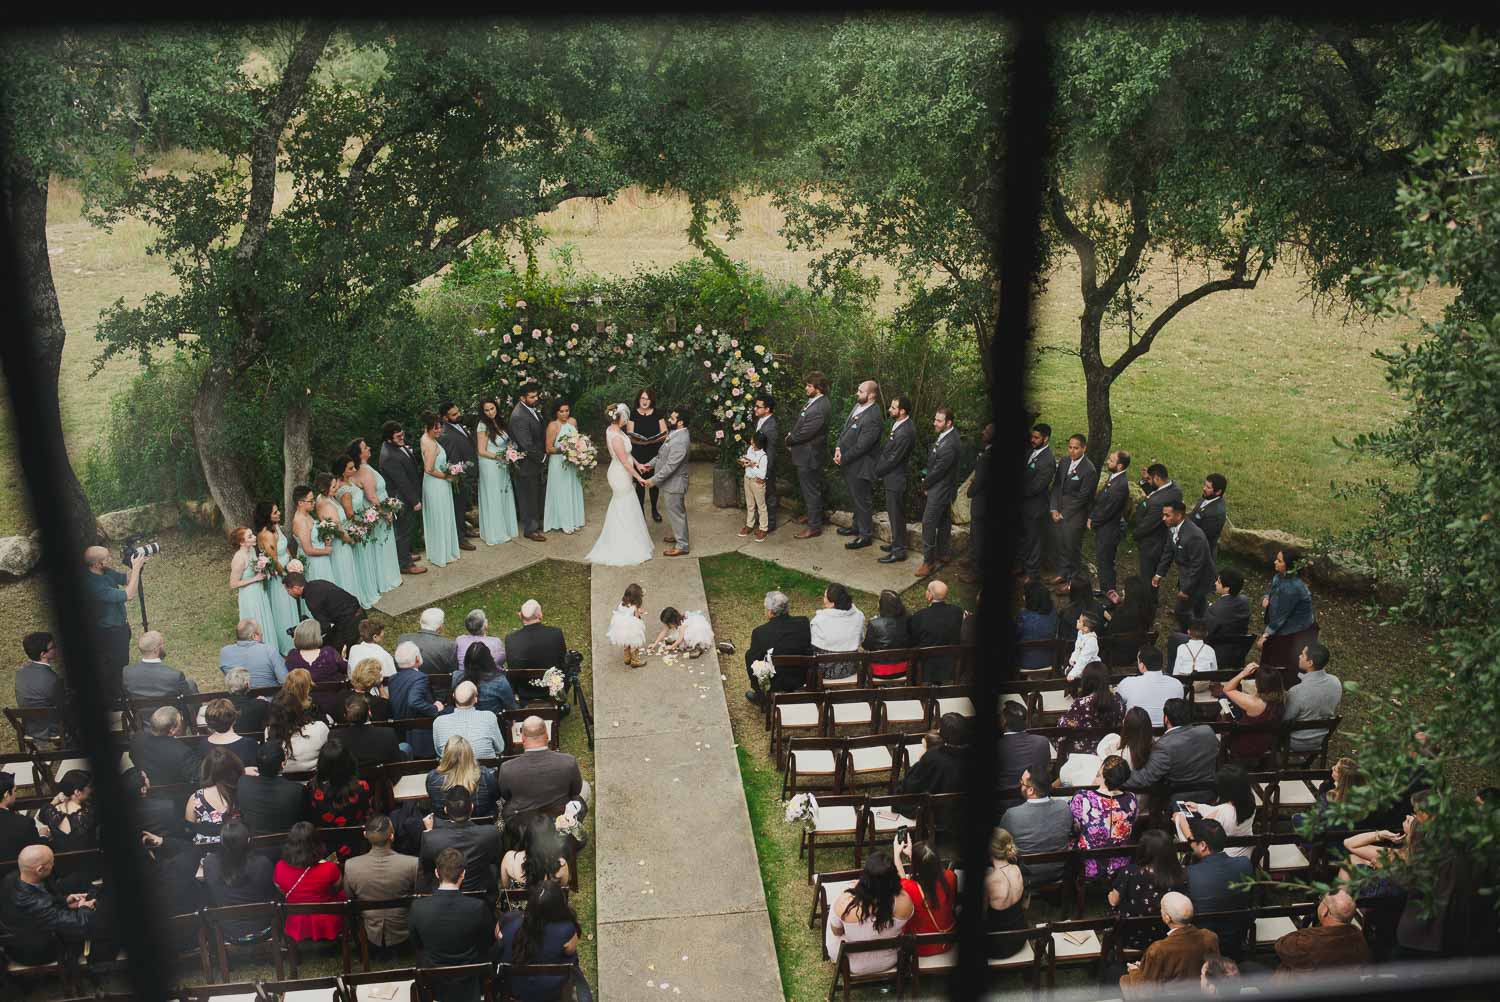 Ceremony shot through window shows flower girls picking up petals during ceremony RUSTIC BARN WEDDING at VISTA WEST RANCH DRIPPING SPRINGS _ BRANDI + AJ-38